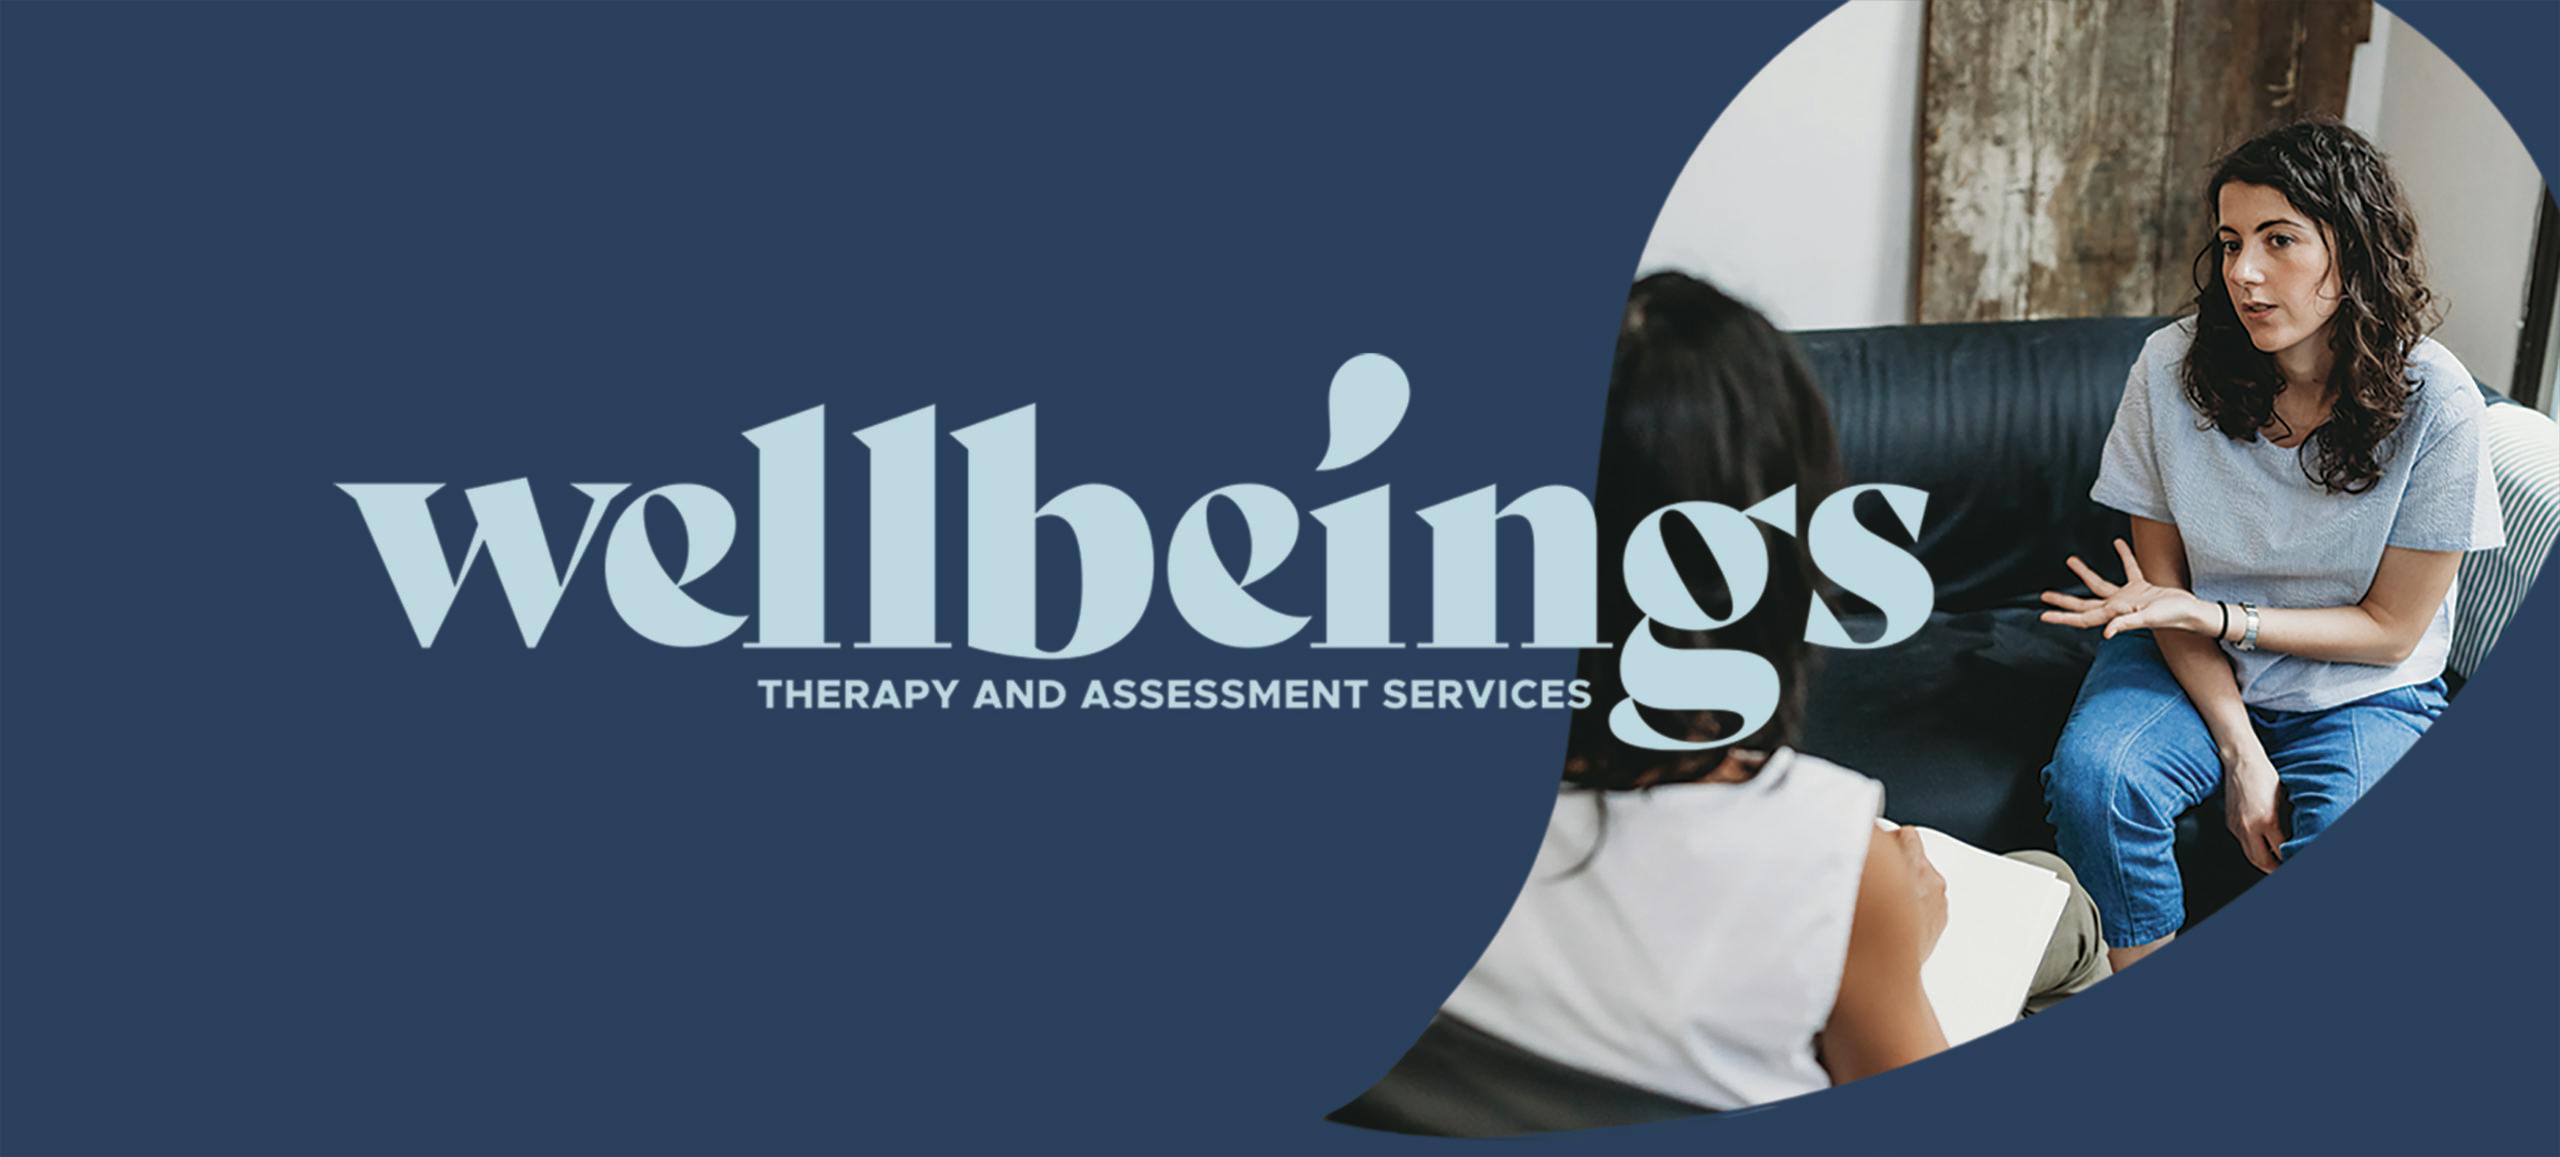 Wellbeings Therapy and Assessment Services